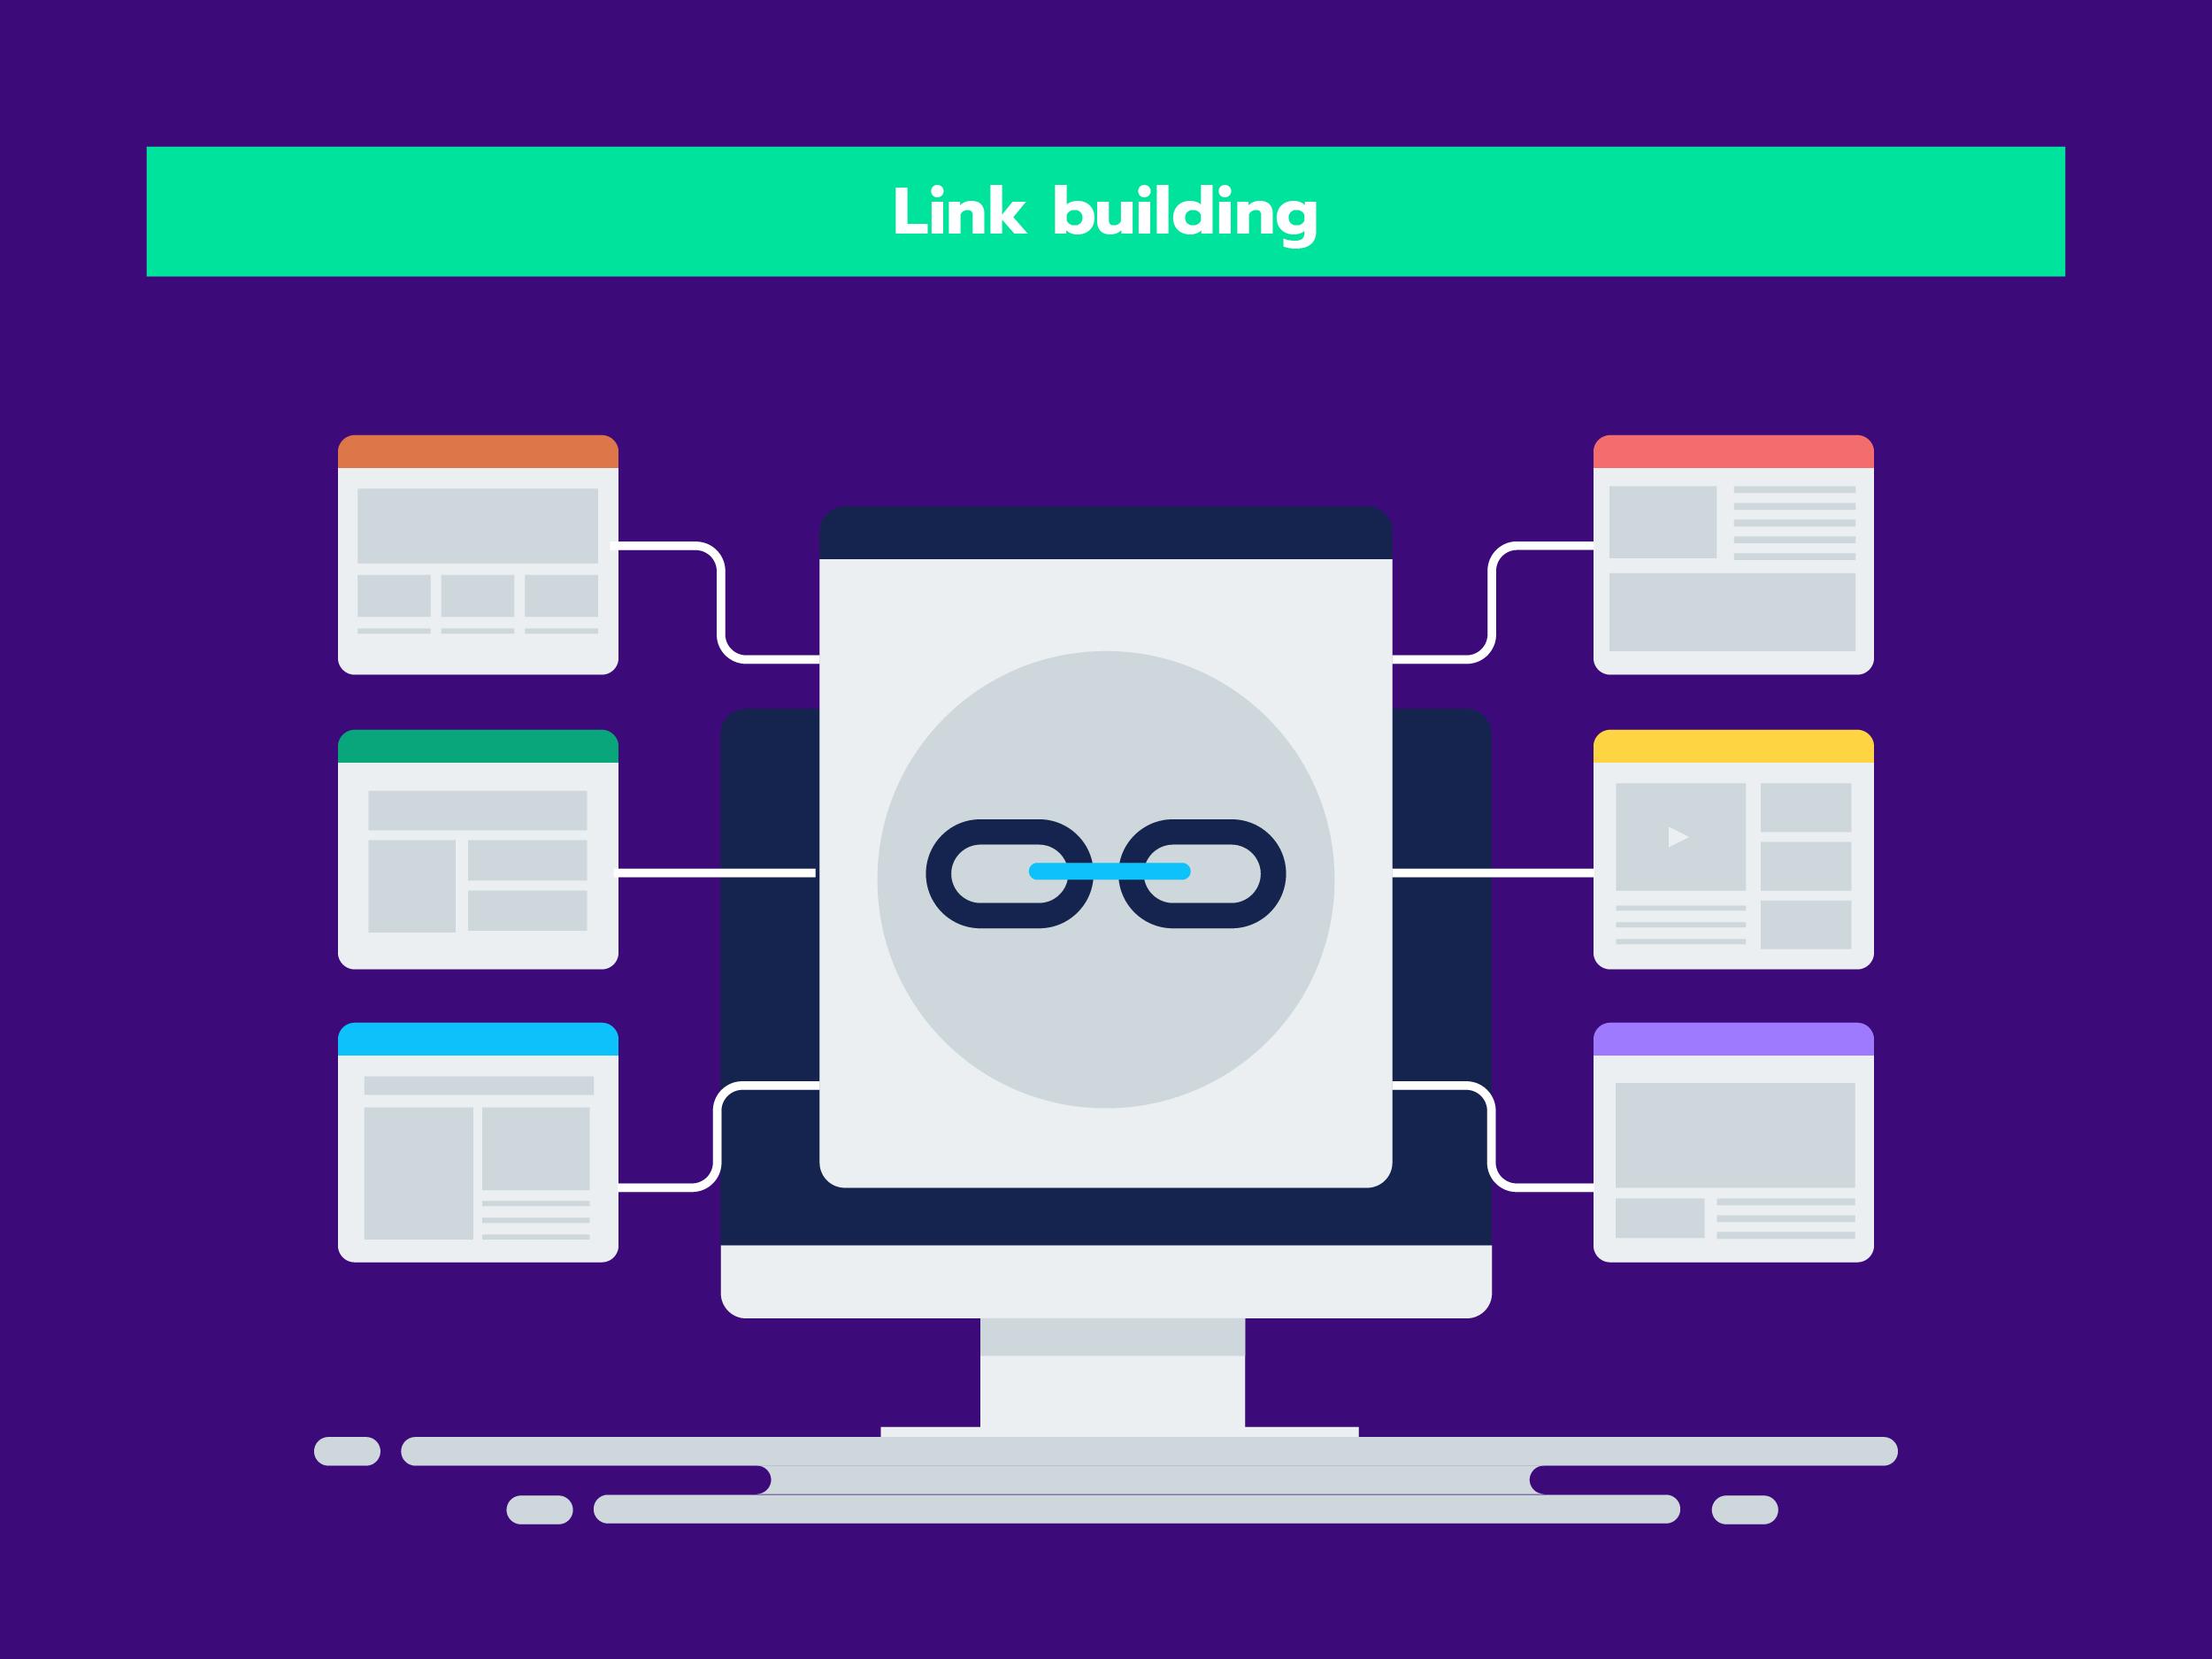 Authority for your website is obtained by link building.